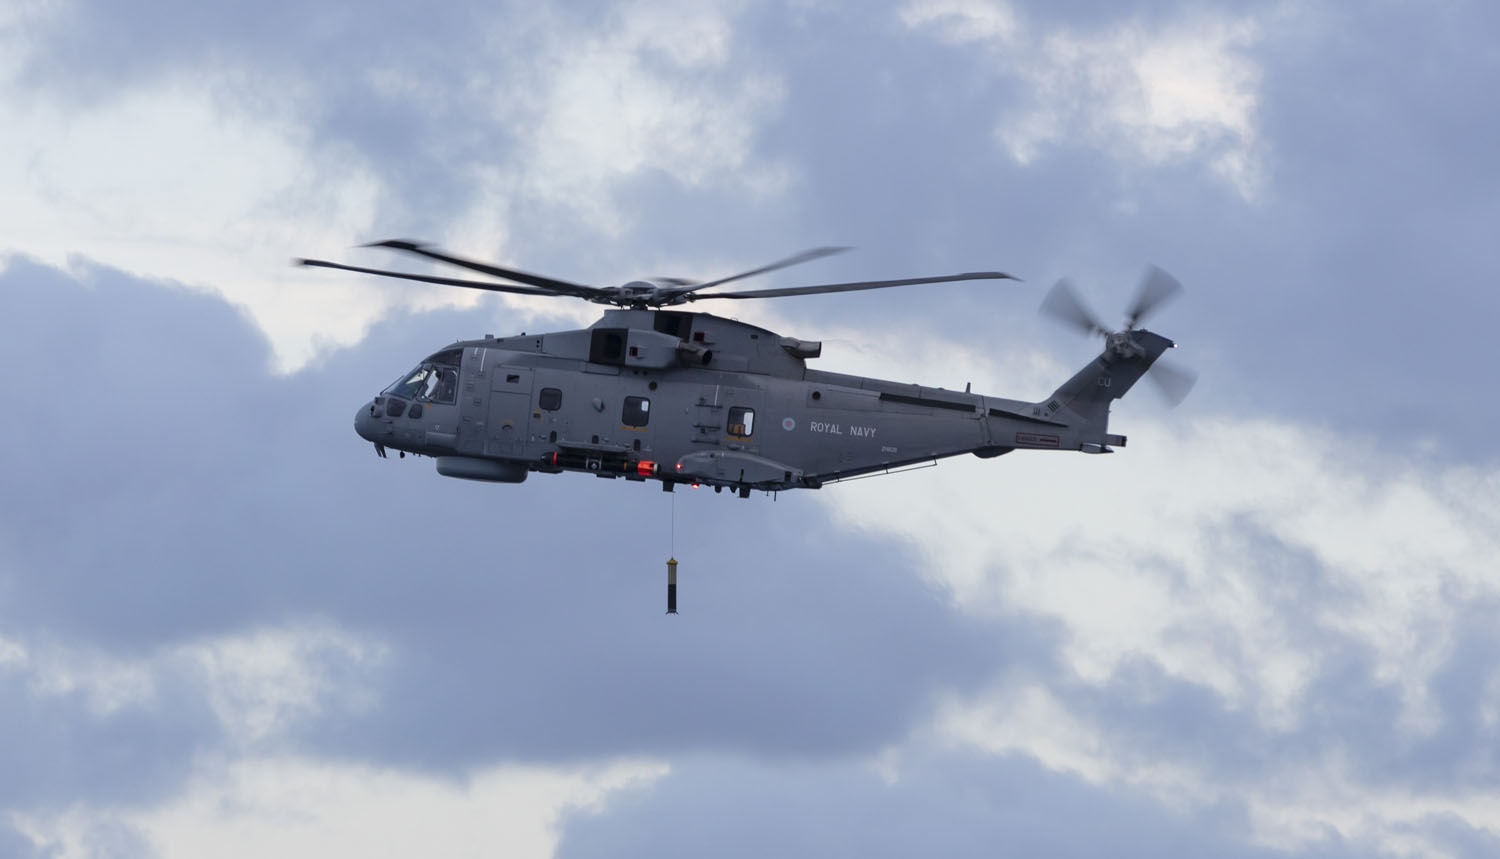 A mark 2 Anti Submarine Warfare Merlin helicopter from 820 Naval Air Squadron, drops its sonar into the Atlantic during an exercise off the East coast of the USA.